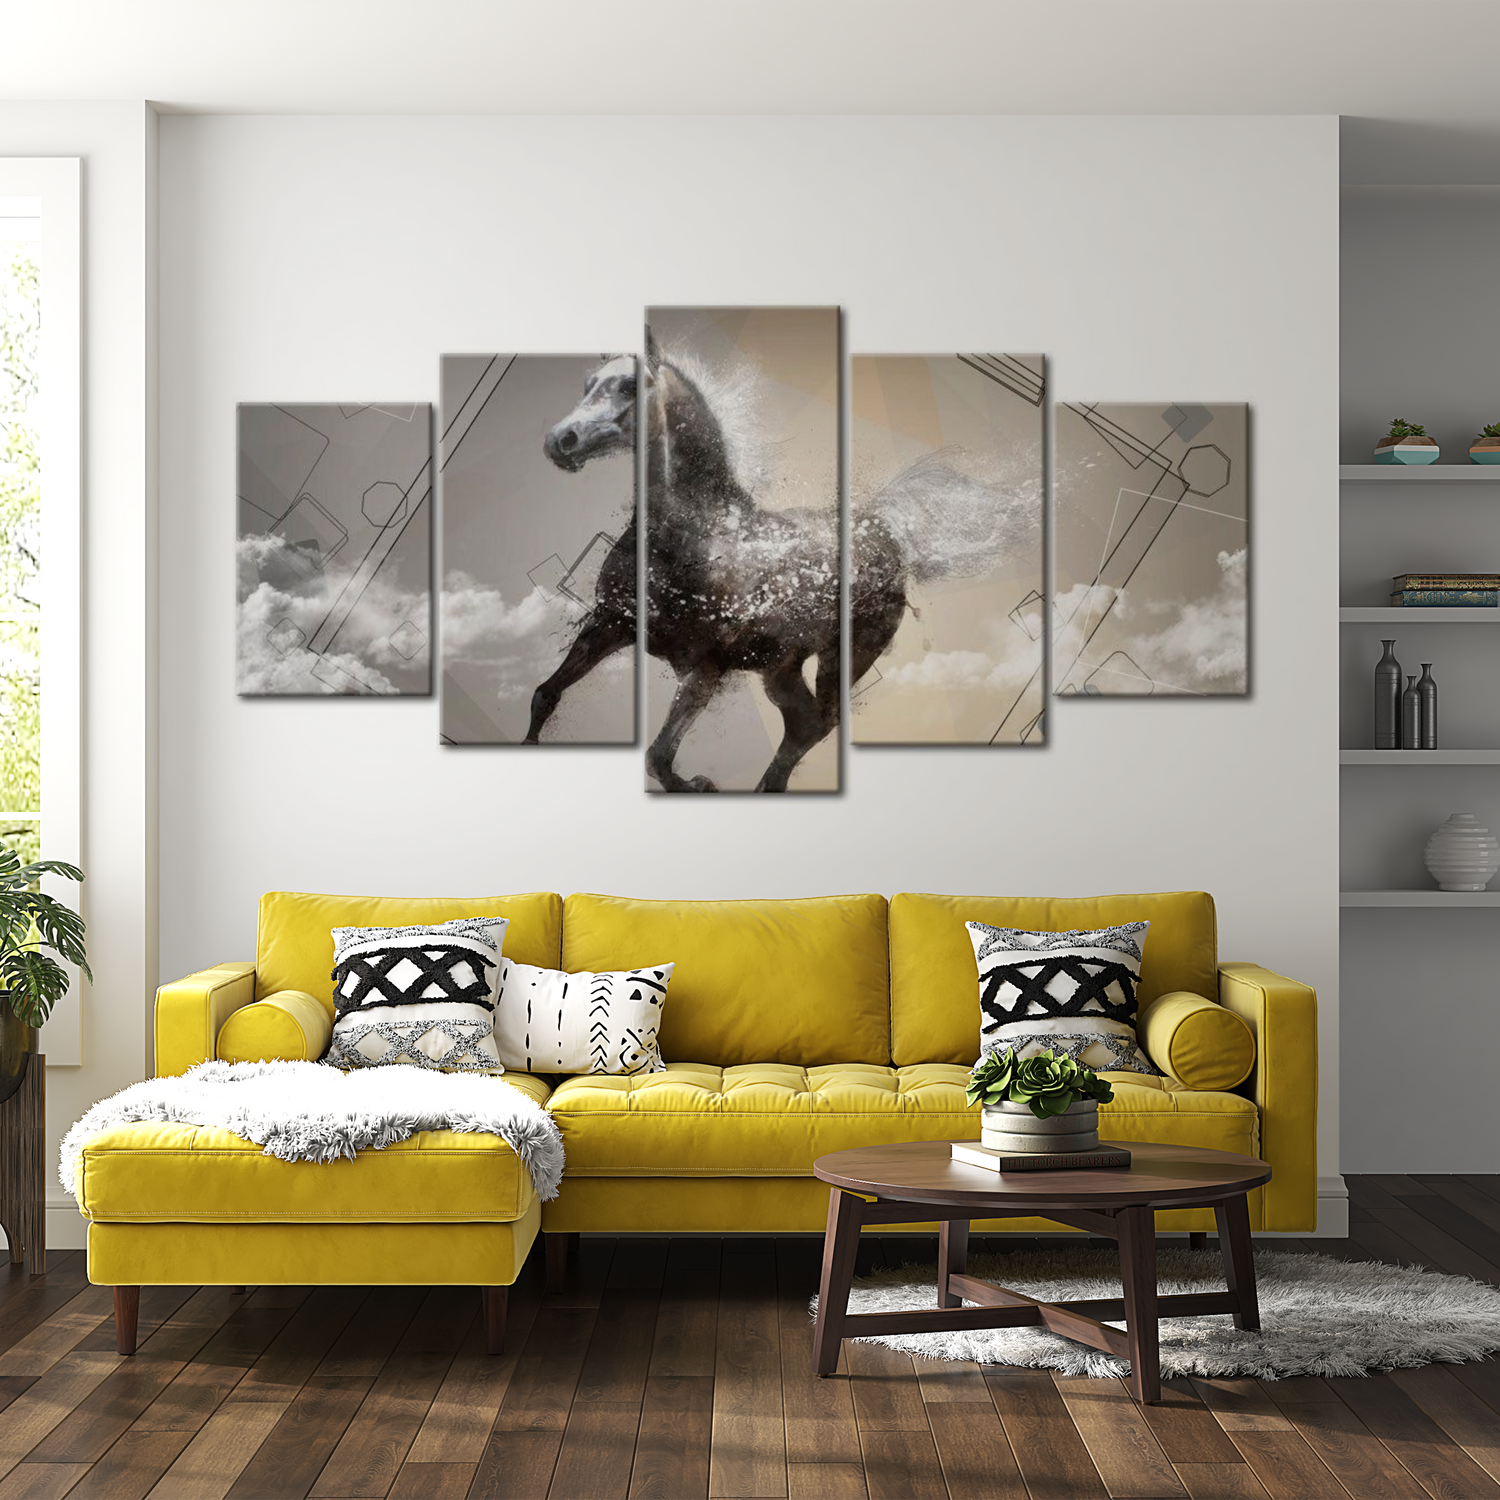 Stretched Canvas Animal Art - Fancy Gallop 40"Wx20"H